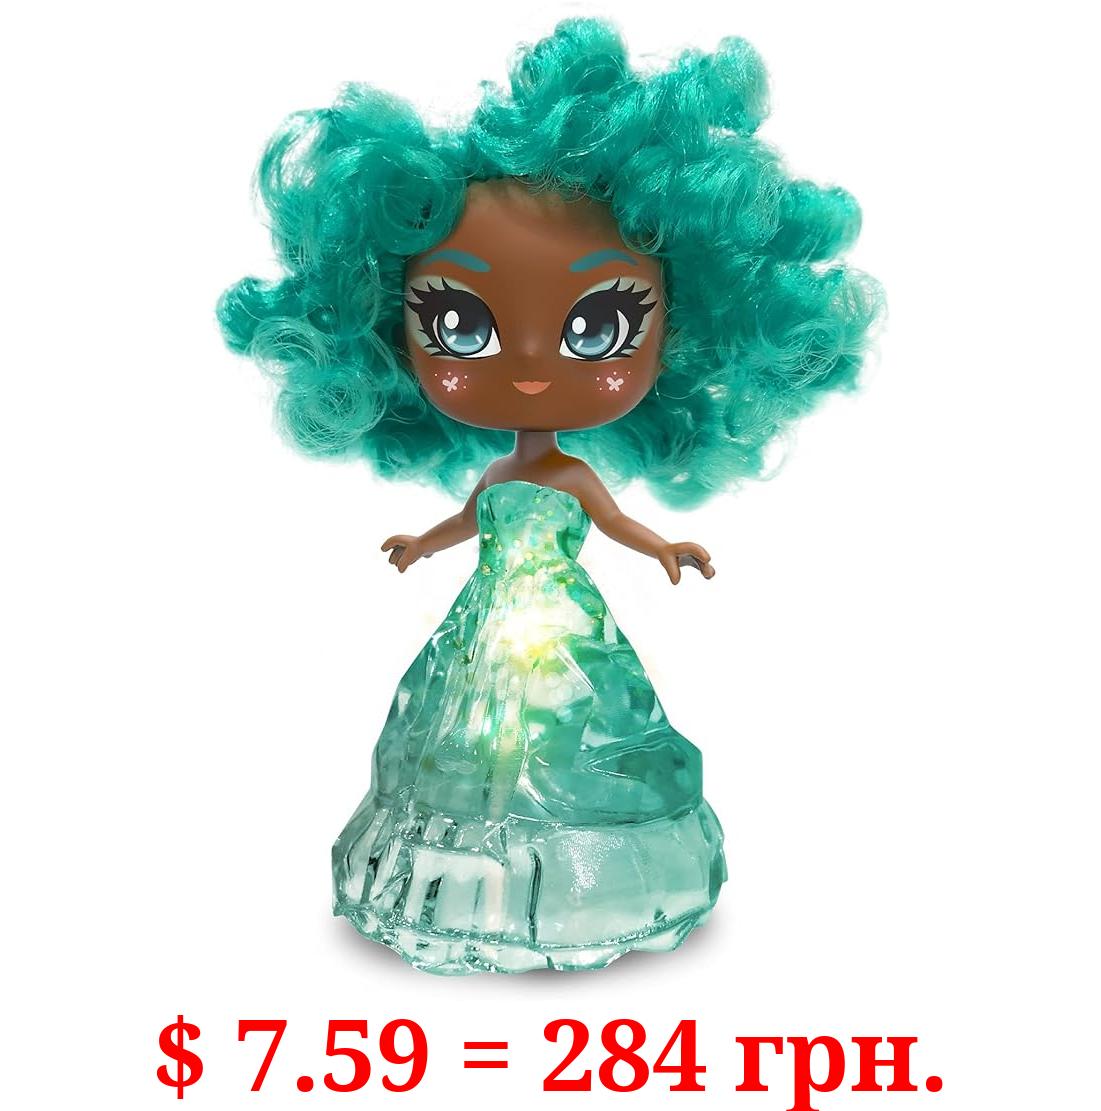 Skyrocket Crystalina Dolls - Turquoise Girls Collectible Toys with Color Changing LED Dress and Amulet Necklace